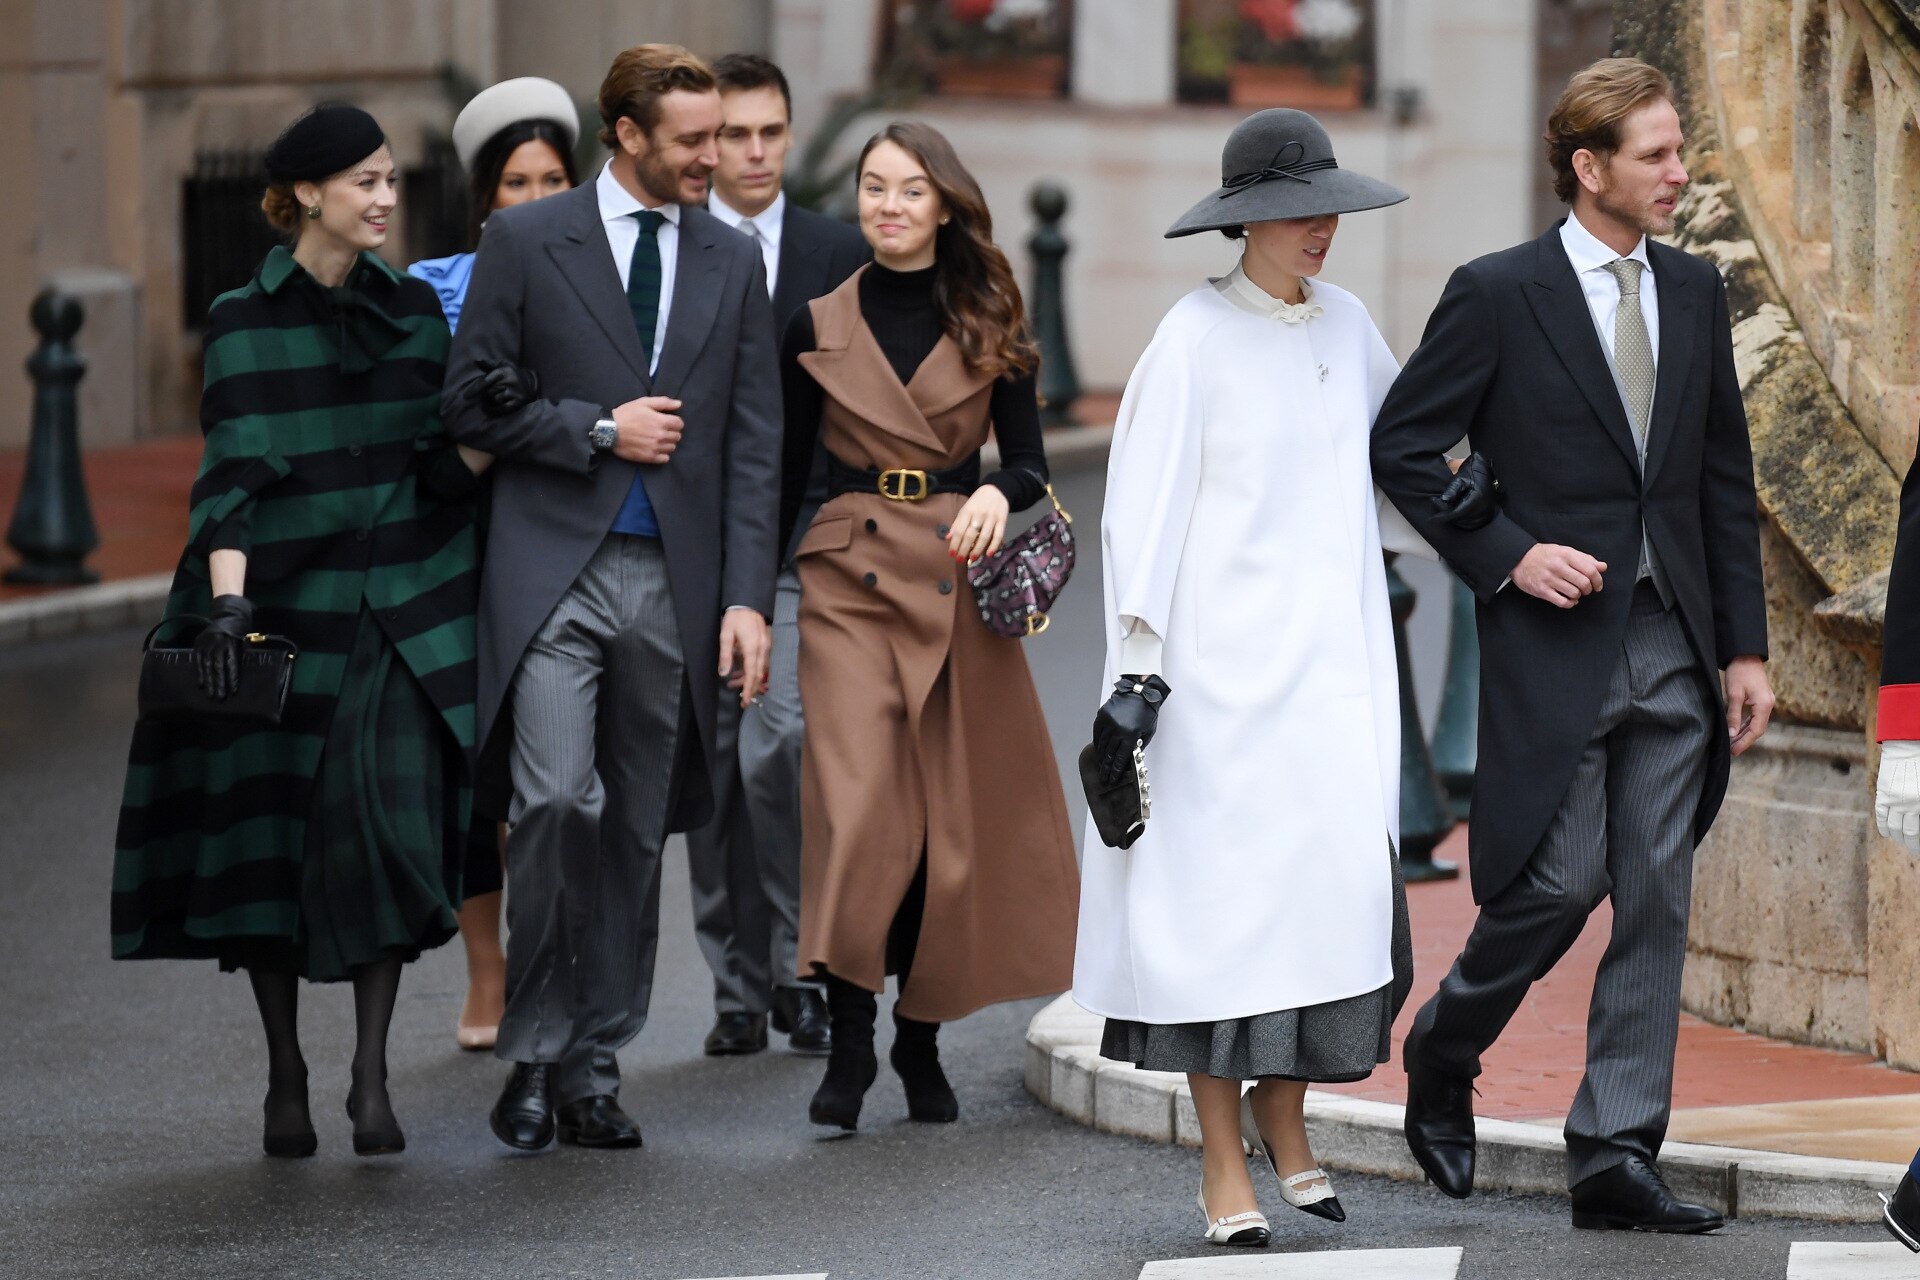 The Monaco royal family were the ultimate fashion squad in Dior for their national day of celebrations